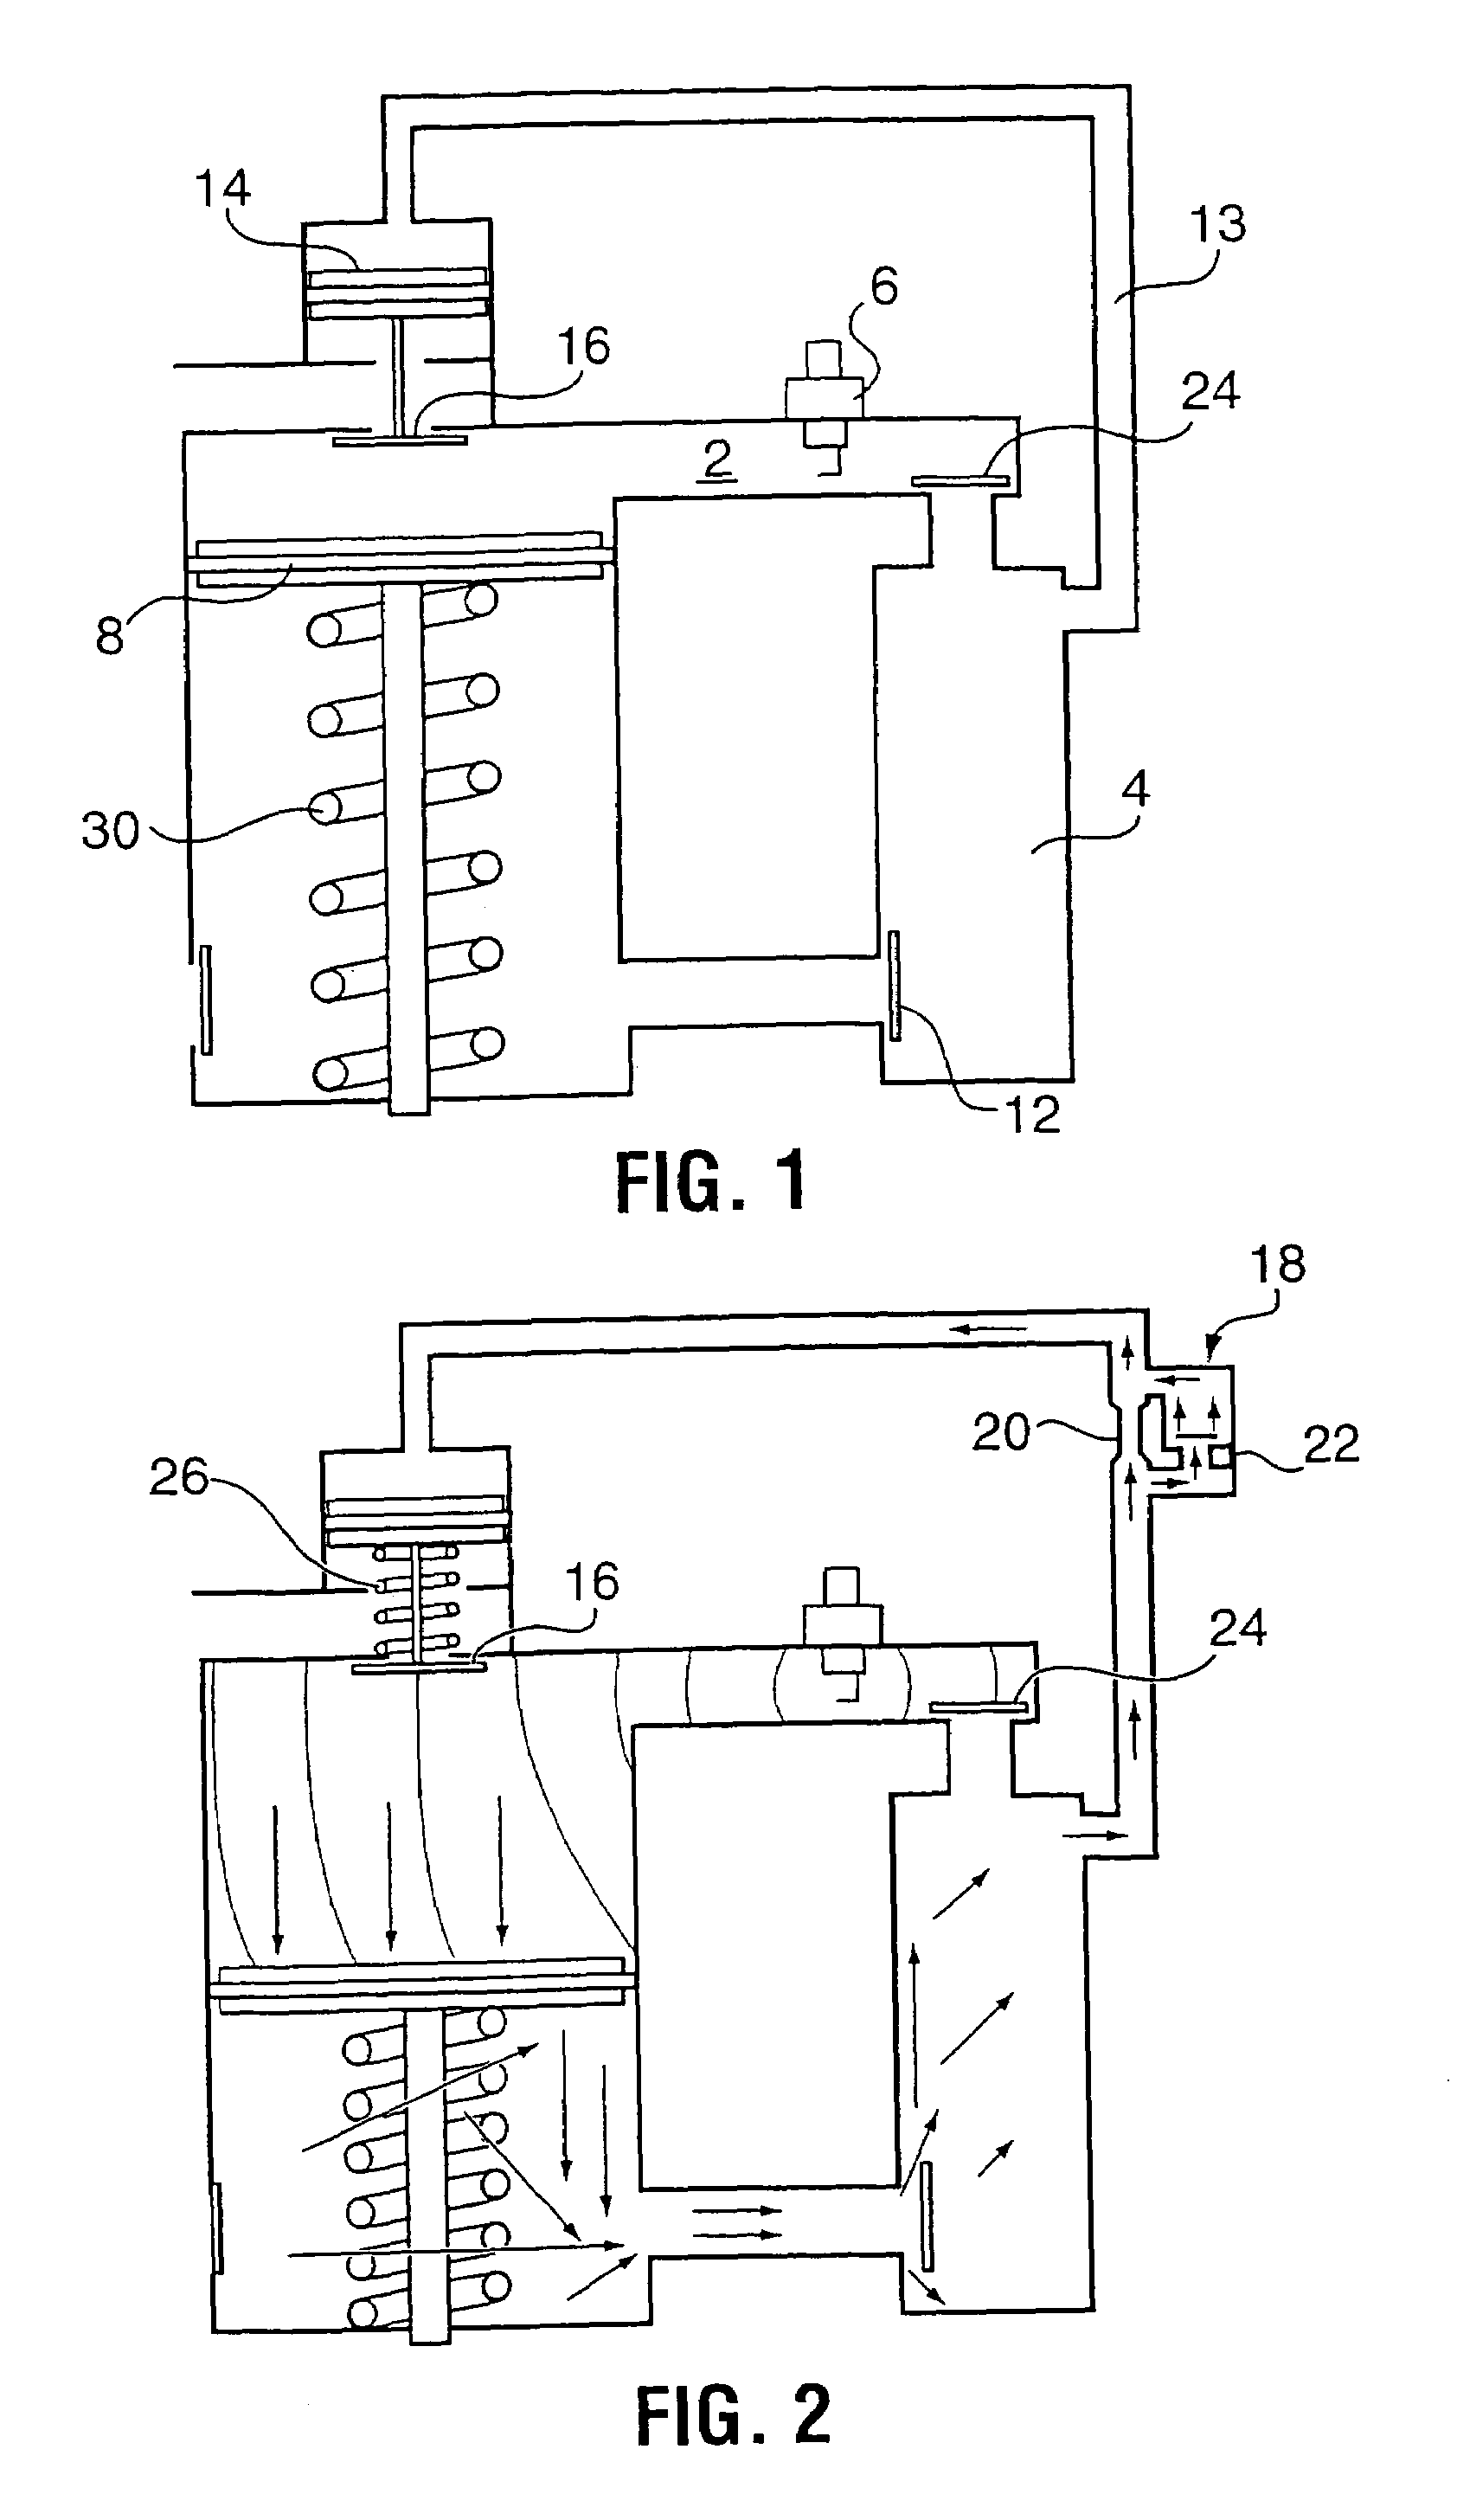 Scavenging system for intermittent linear motor